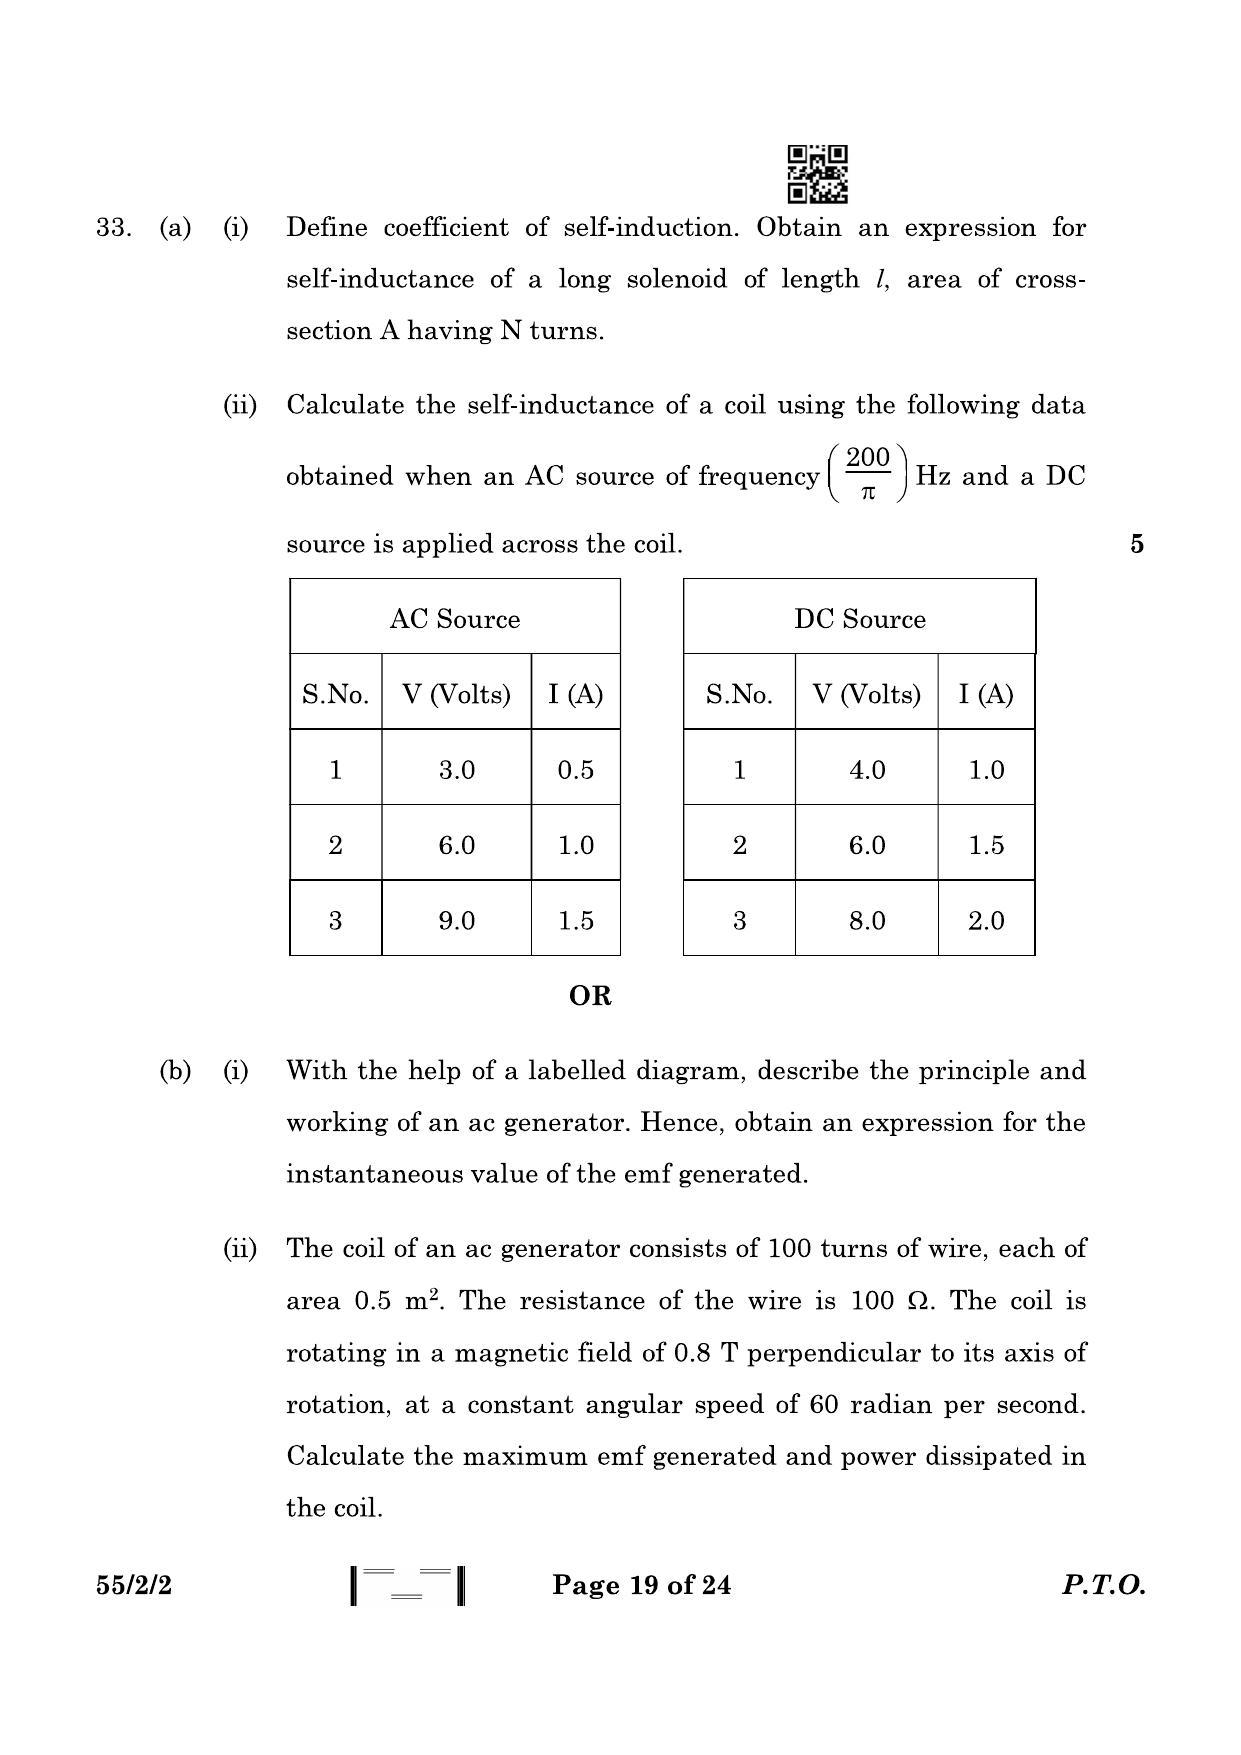 CBSE Class 12 55-2-2 Physics 2023 Question Paper - Page 19